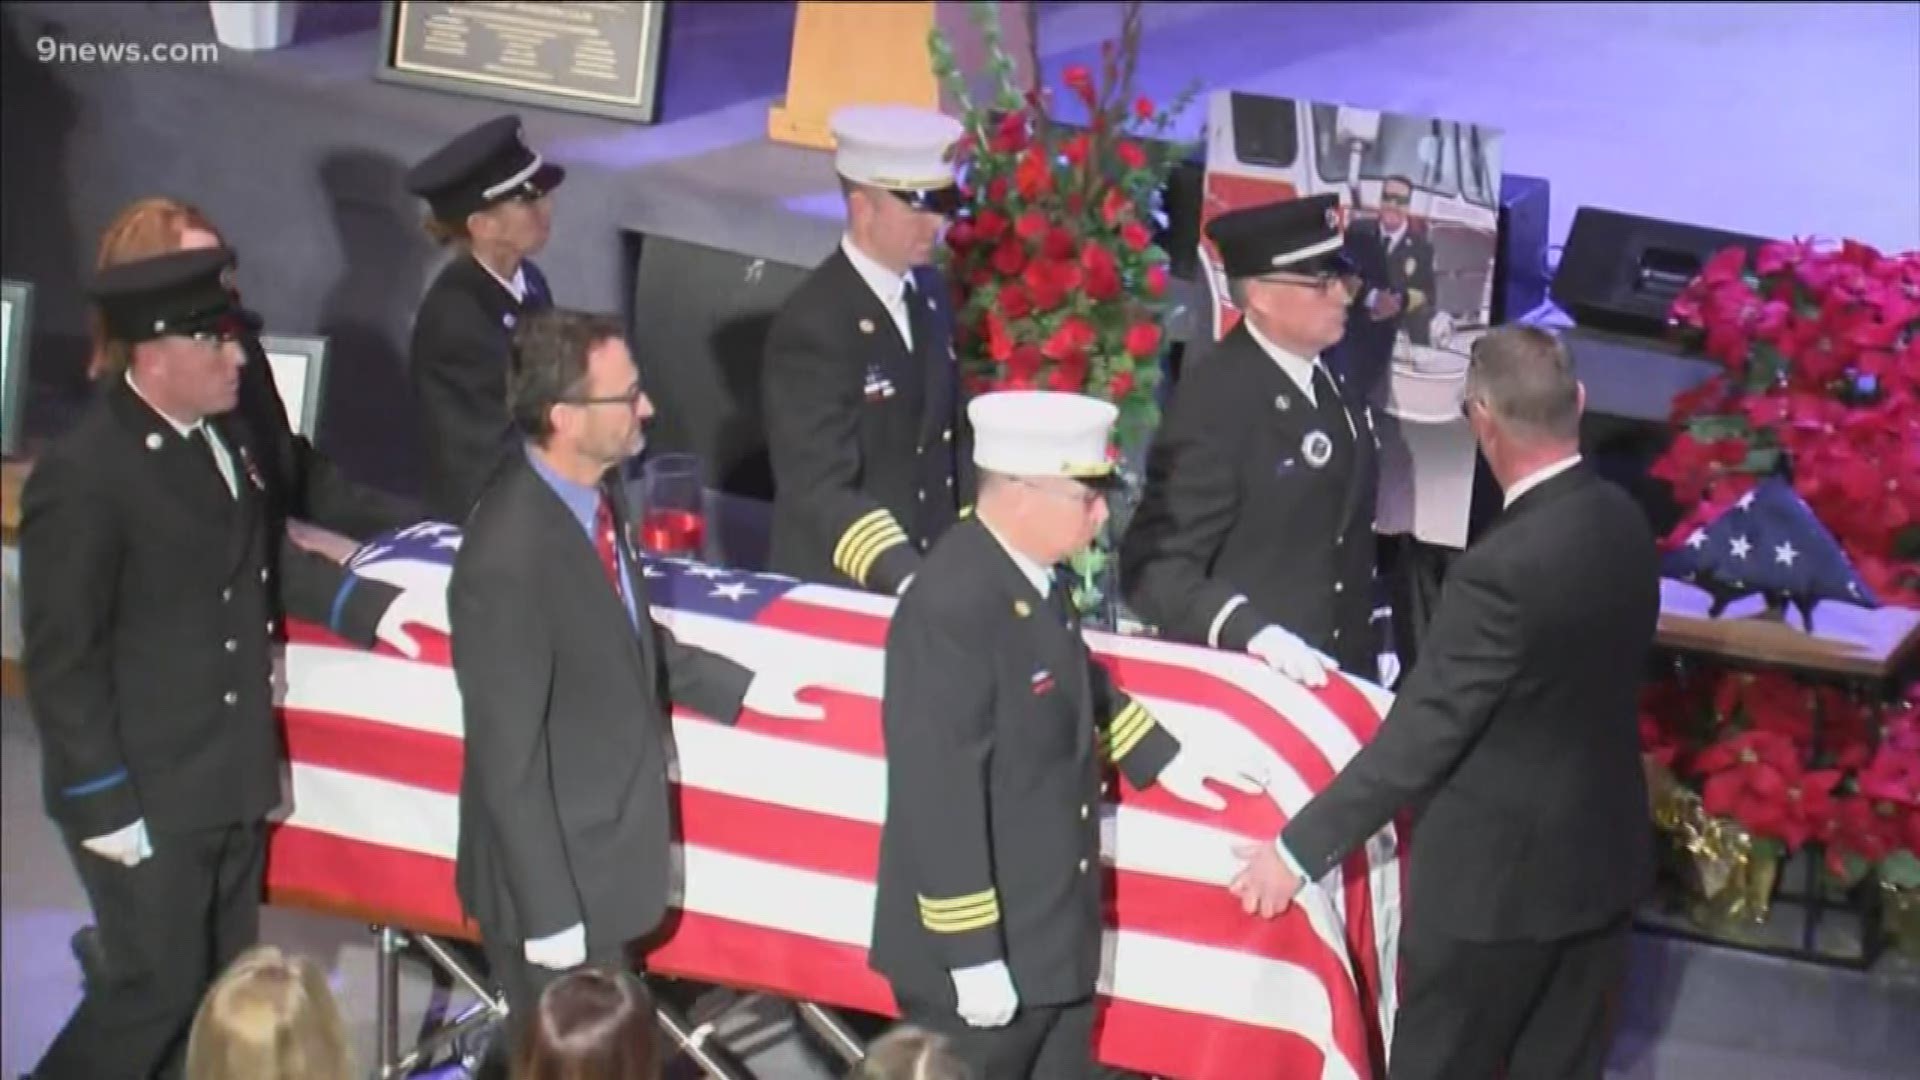 Chief Troy Jackson was laid to rest Friday following a full honors memorial service and procession.